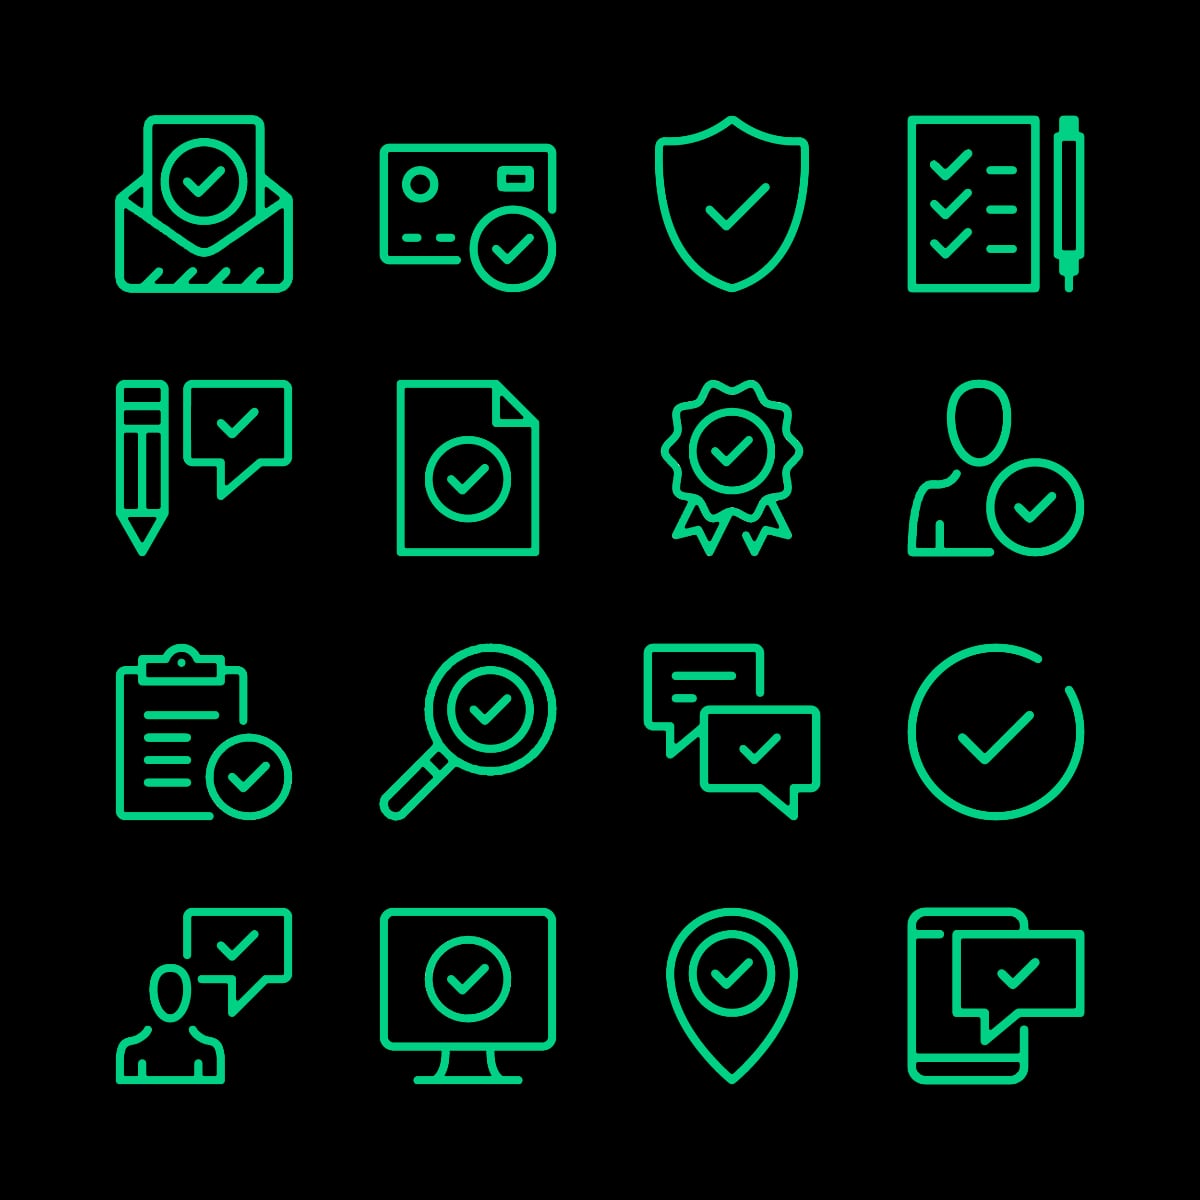 A variety of icons representing quality assurance testing.